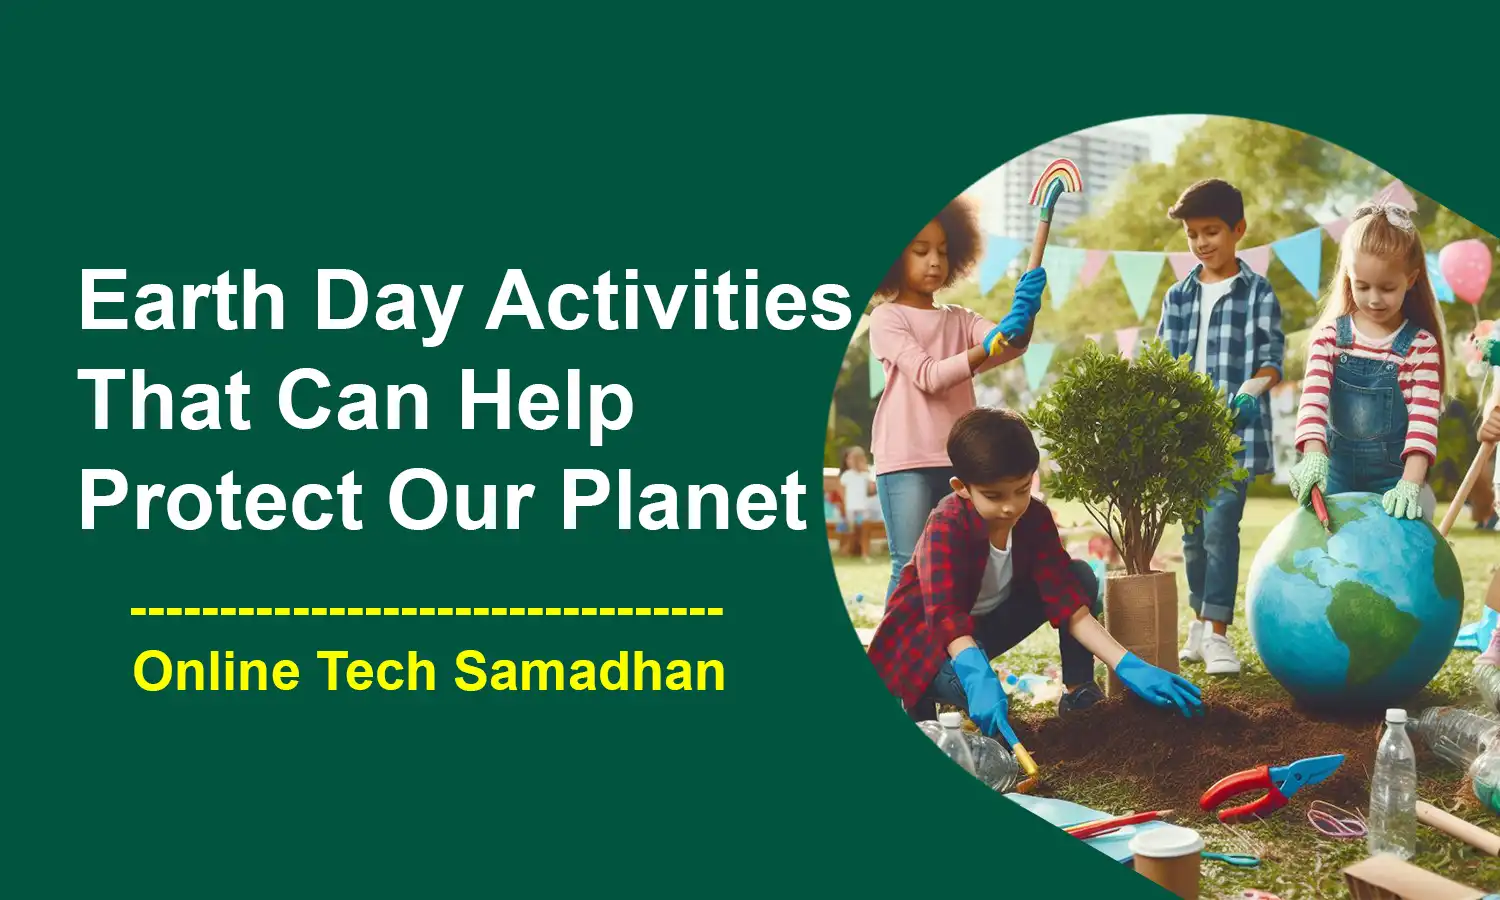 Earth Day Activities That Can Help Protect Our Planet